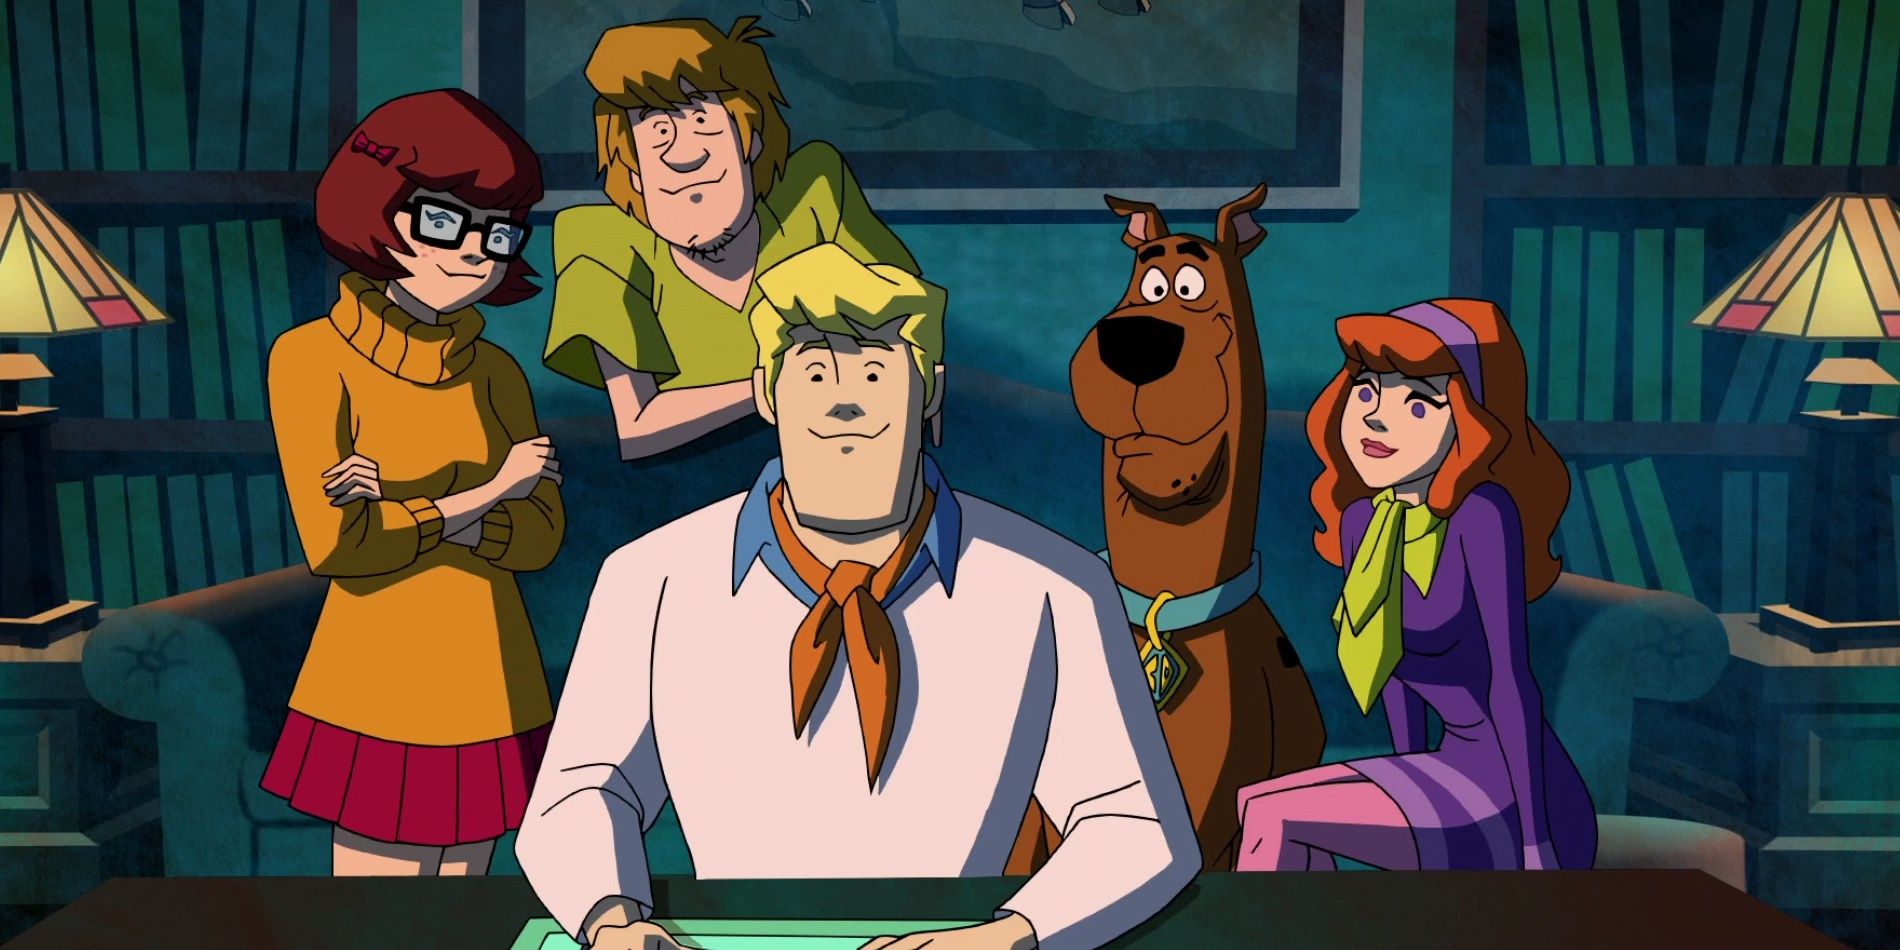 The Scooby Gang sits in a library in Scooby-Doo Mystery Incorporated.